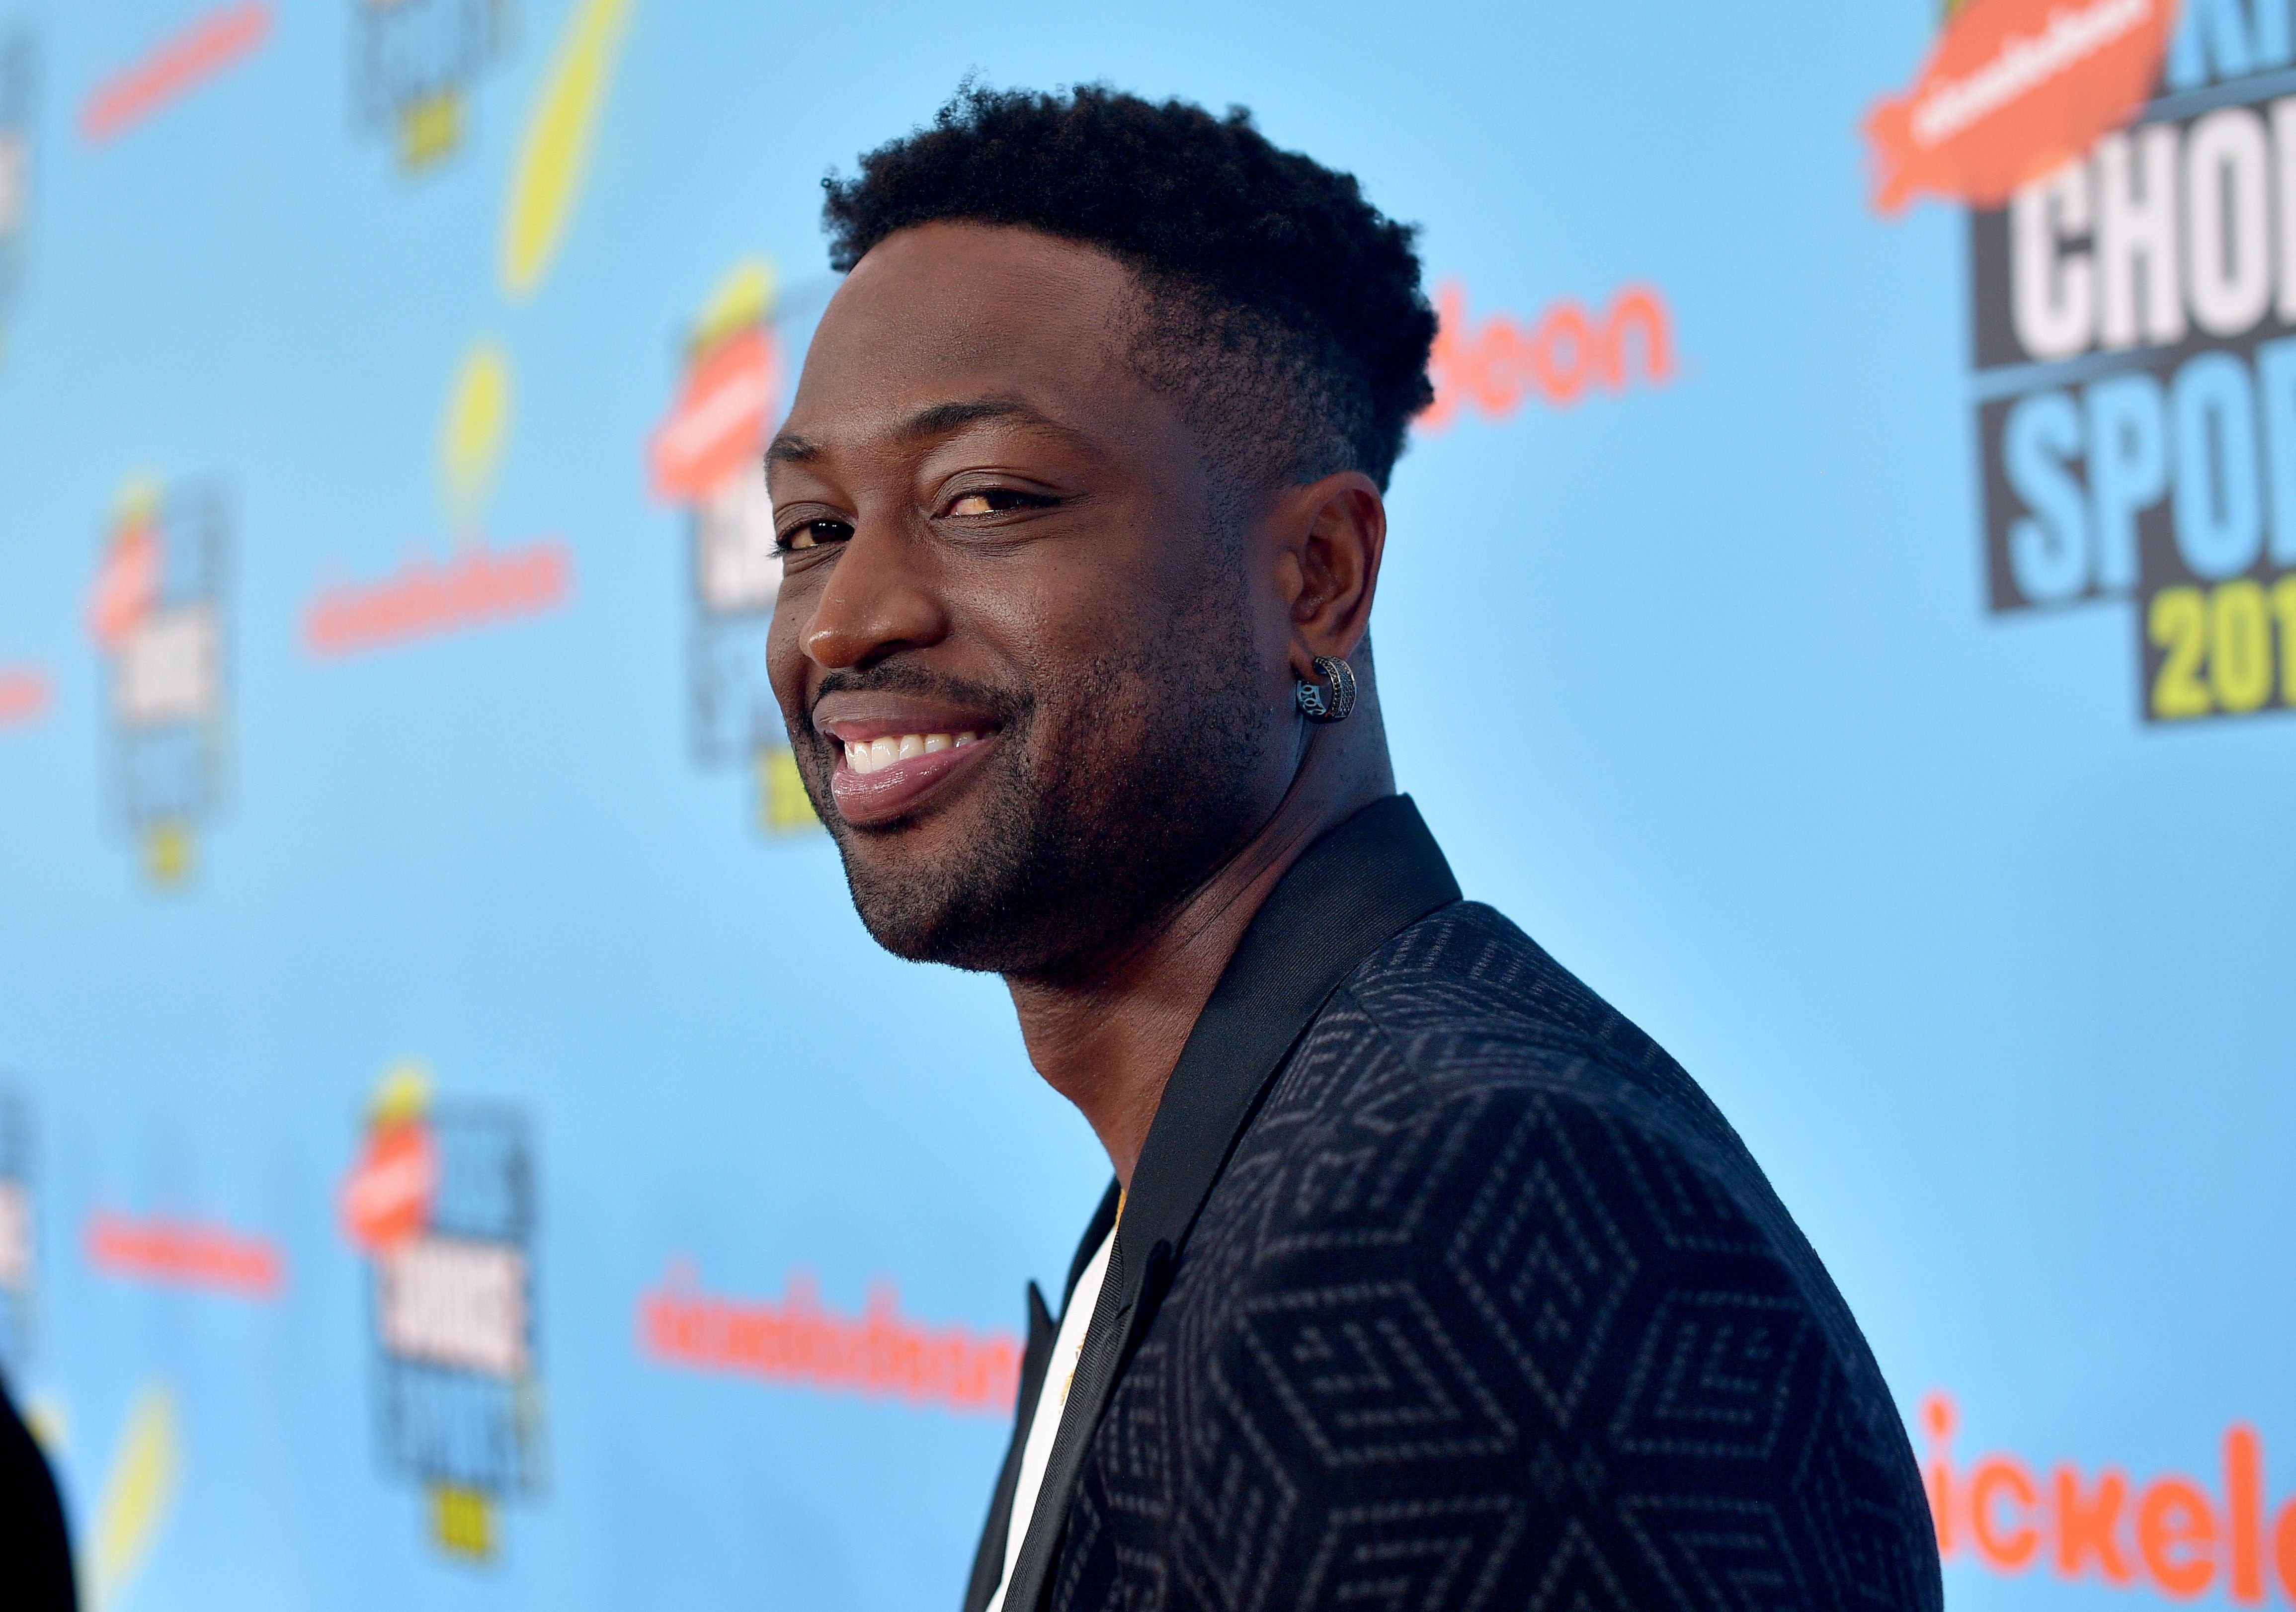 Dwayne Wade at Nickelodeon Kid’s Choice Sports on July 11, 2019 in Santa Monica. | Photo: Getty Images